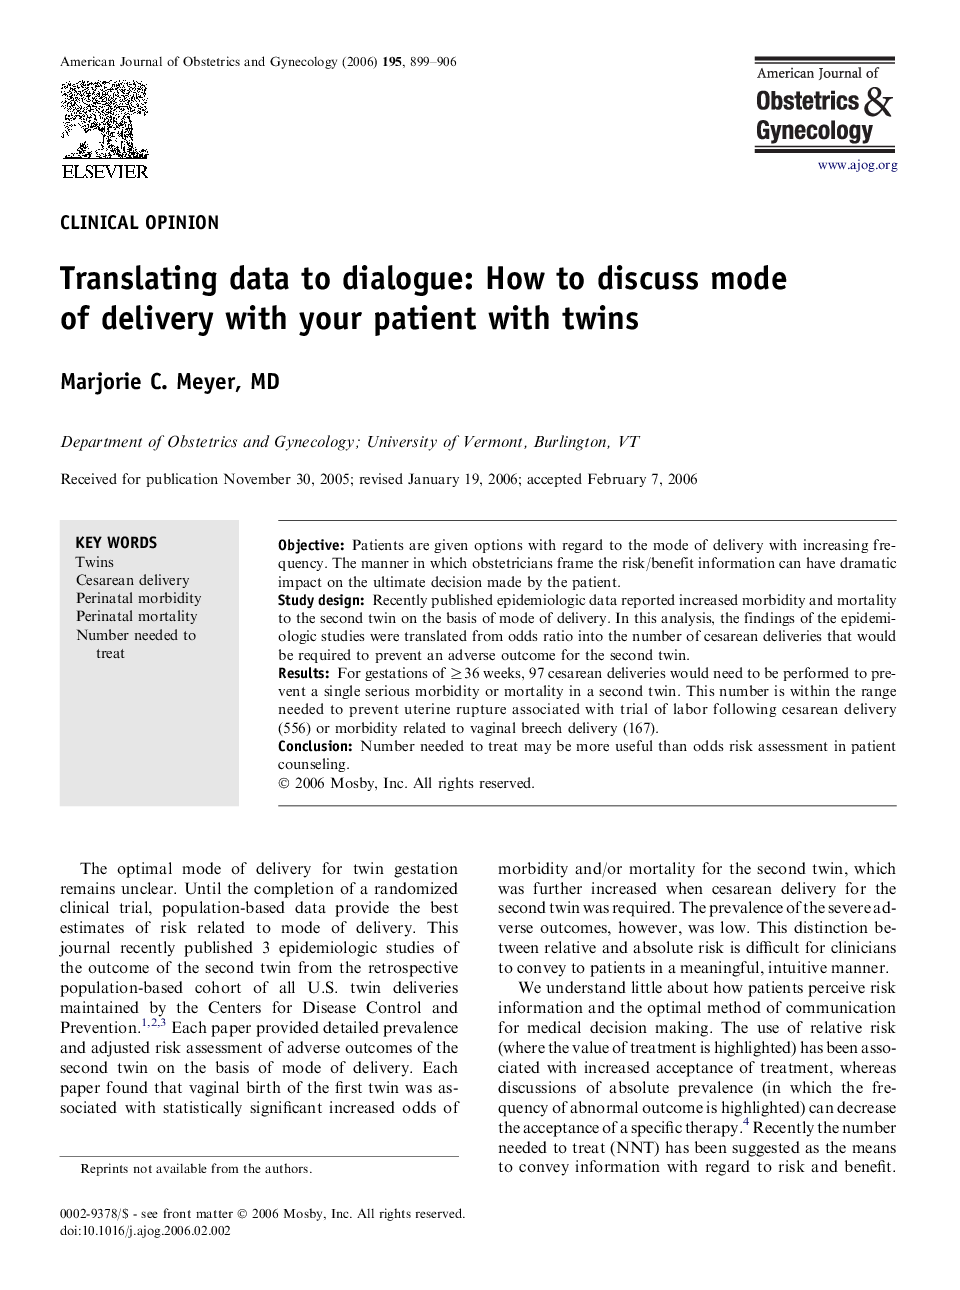 Translating data to dialogue: How to discuss mode of delivery with your patient with twins 